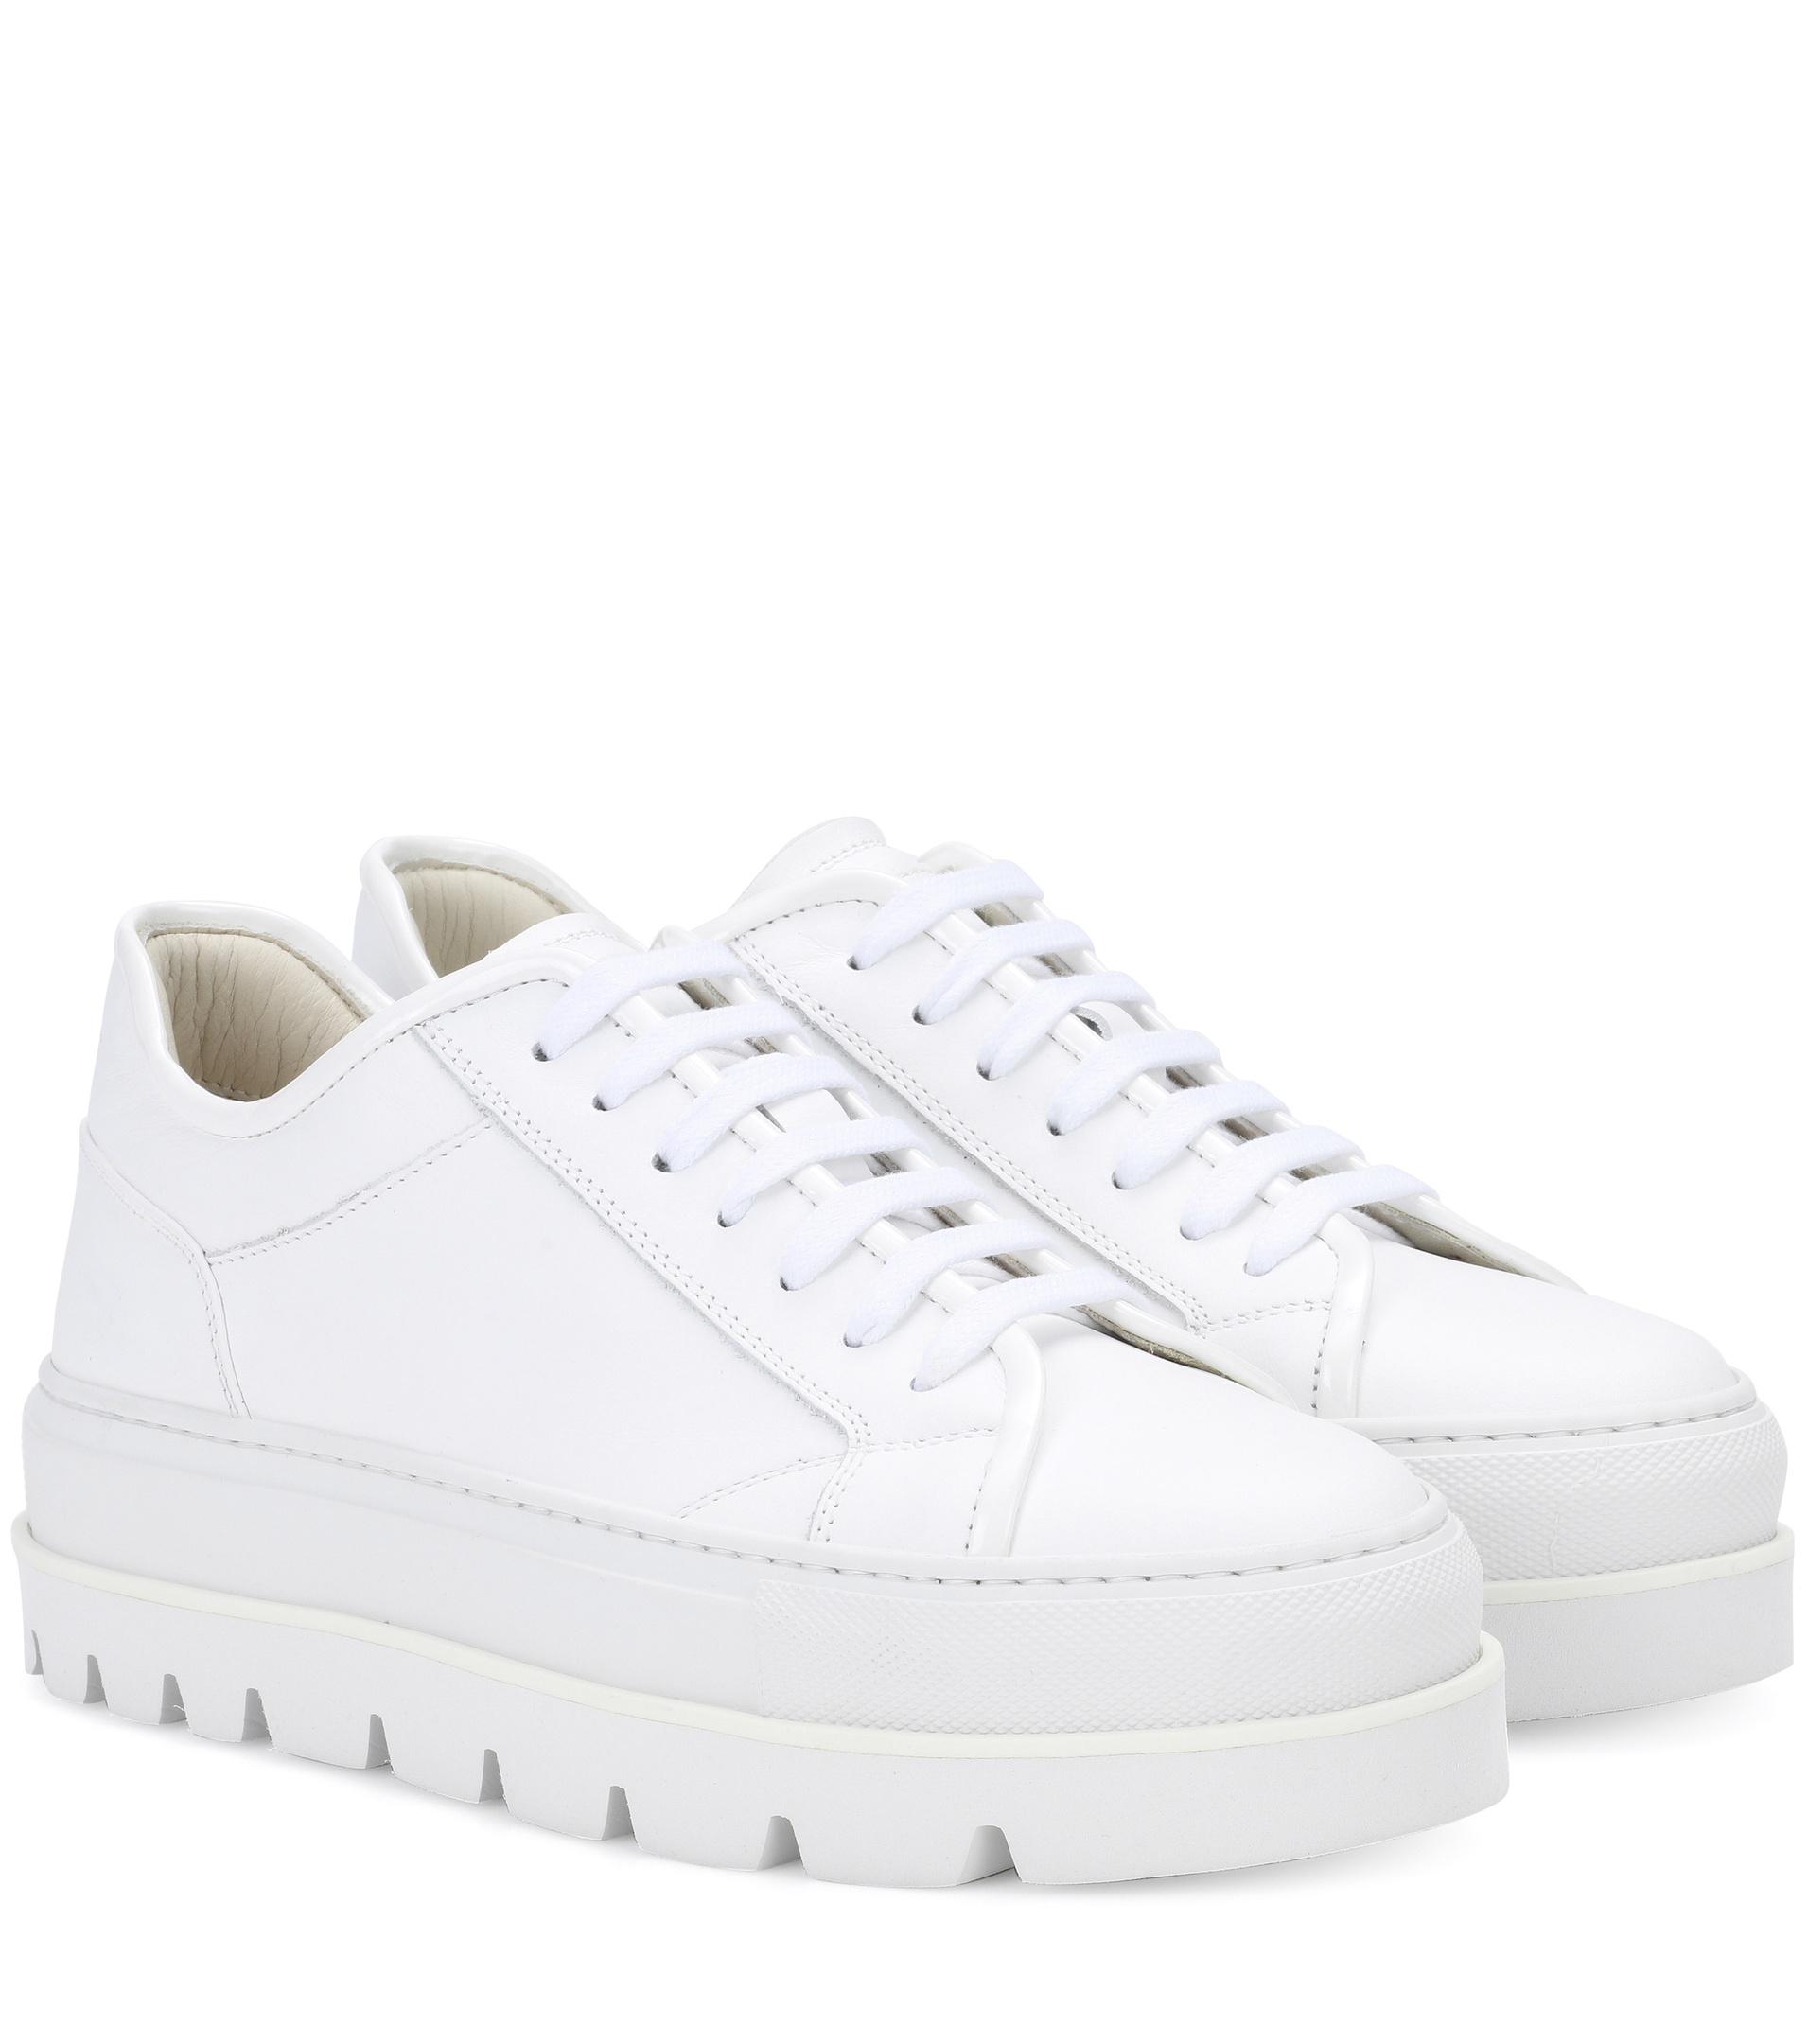 MM6 by Maison Martin Margiela Leather Platform Sneakers in White - Lyst